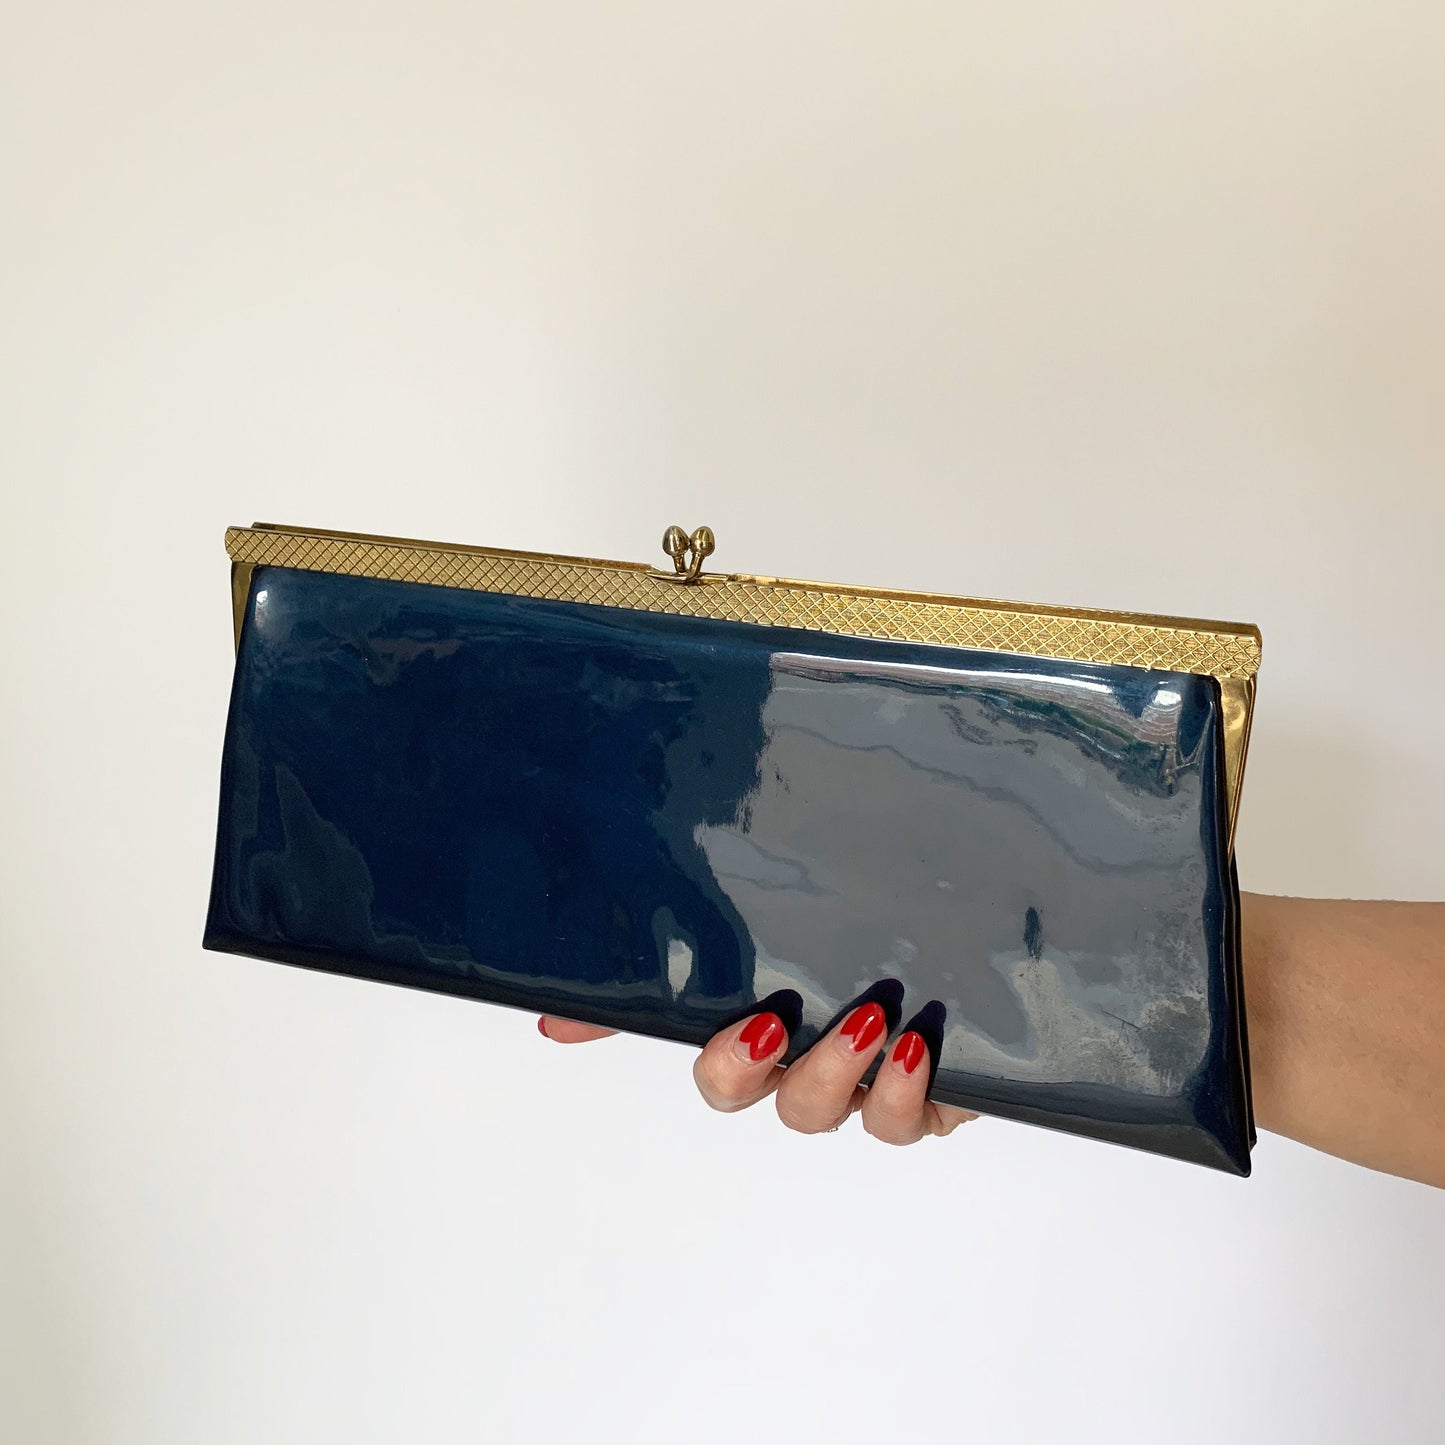 1960s Navy Blue Patent Leather Clutch Bag